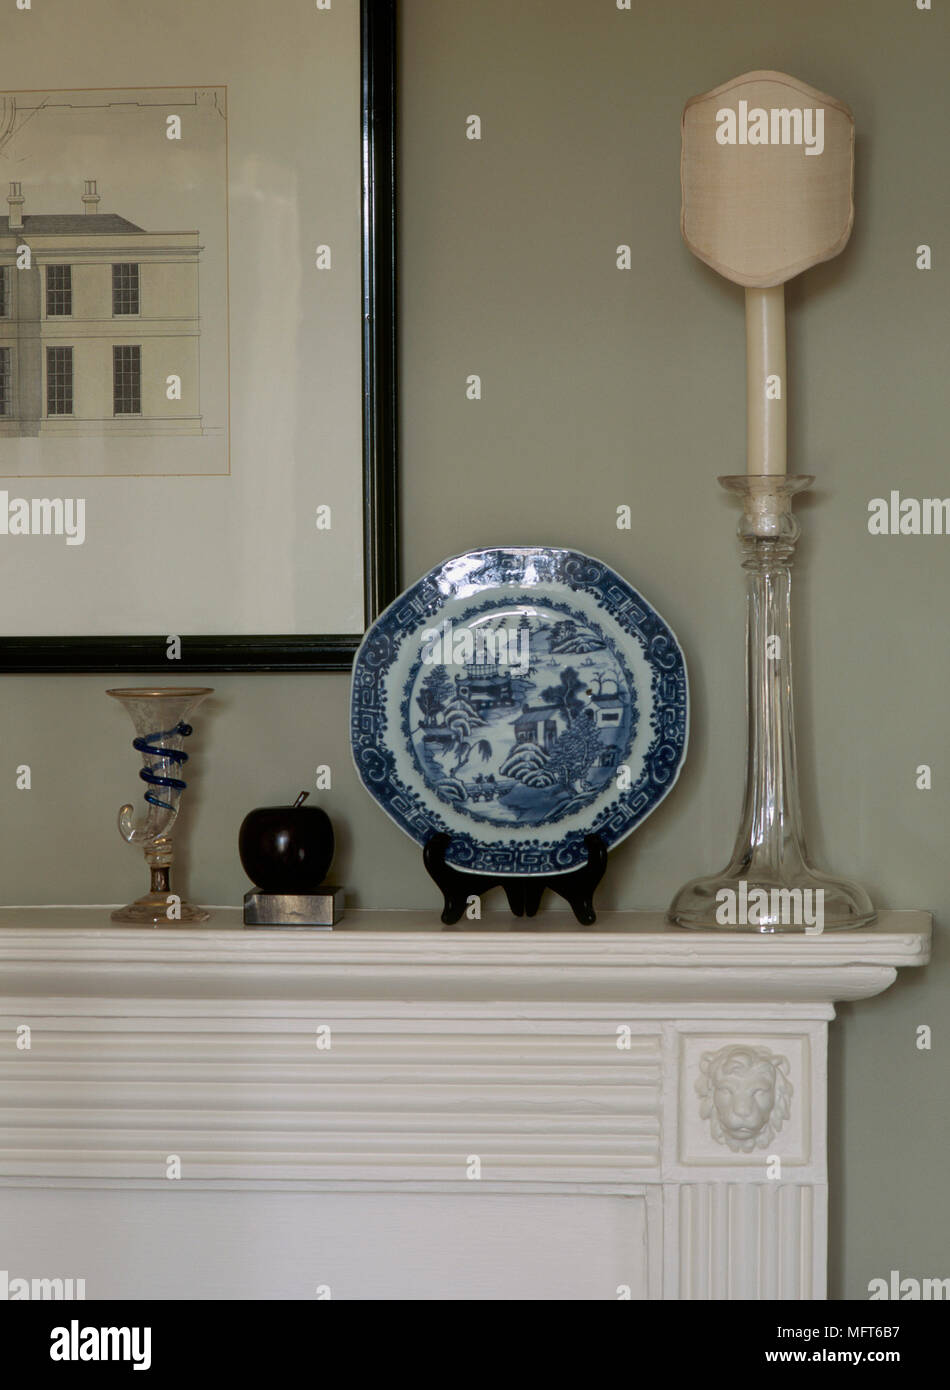 A detail of a traditional fireplace mantelpiece, a glass candlestick and blue white china plate Stock Photo